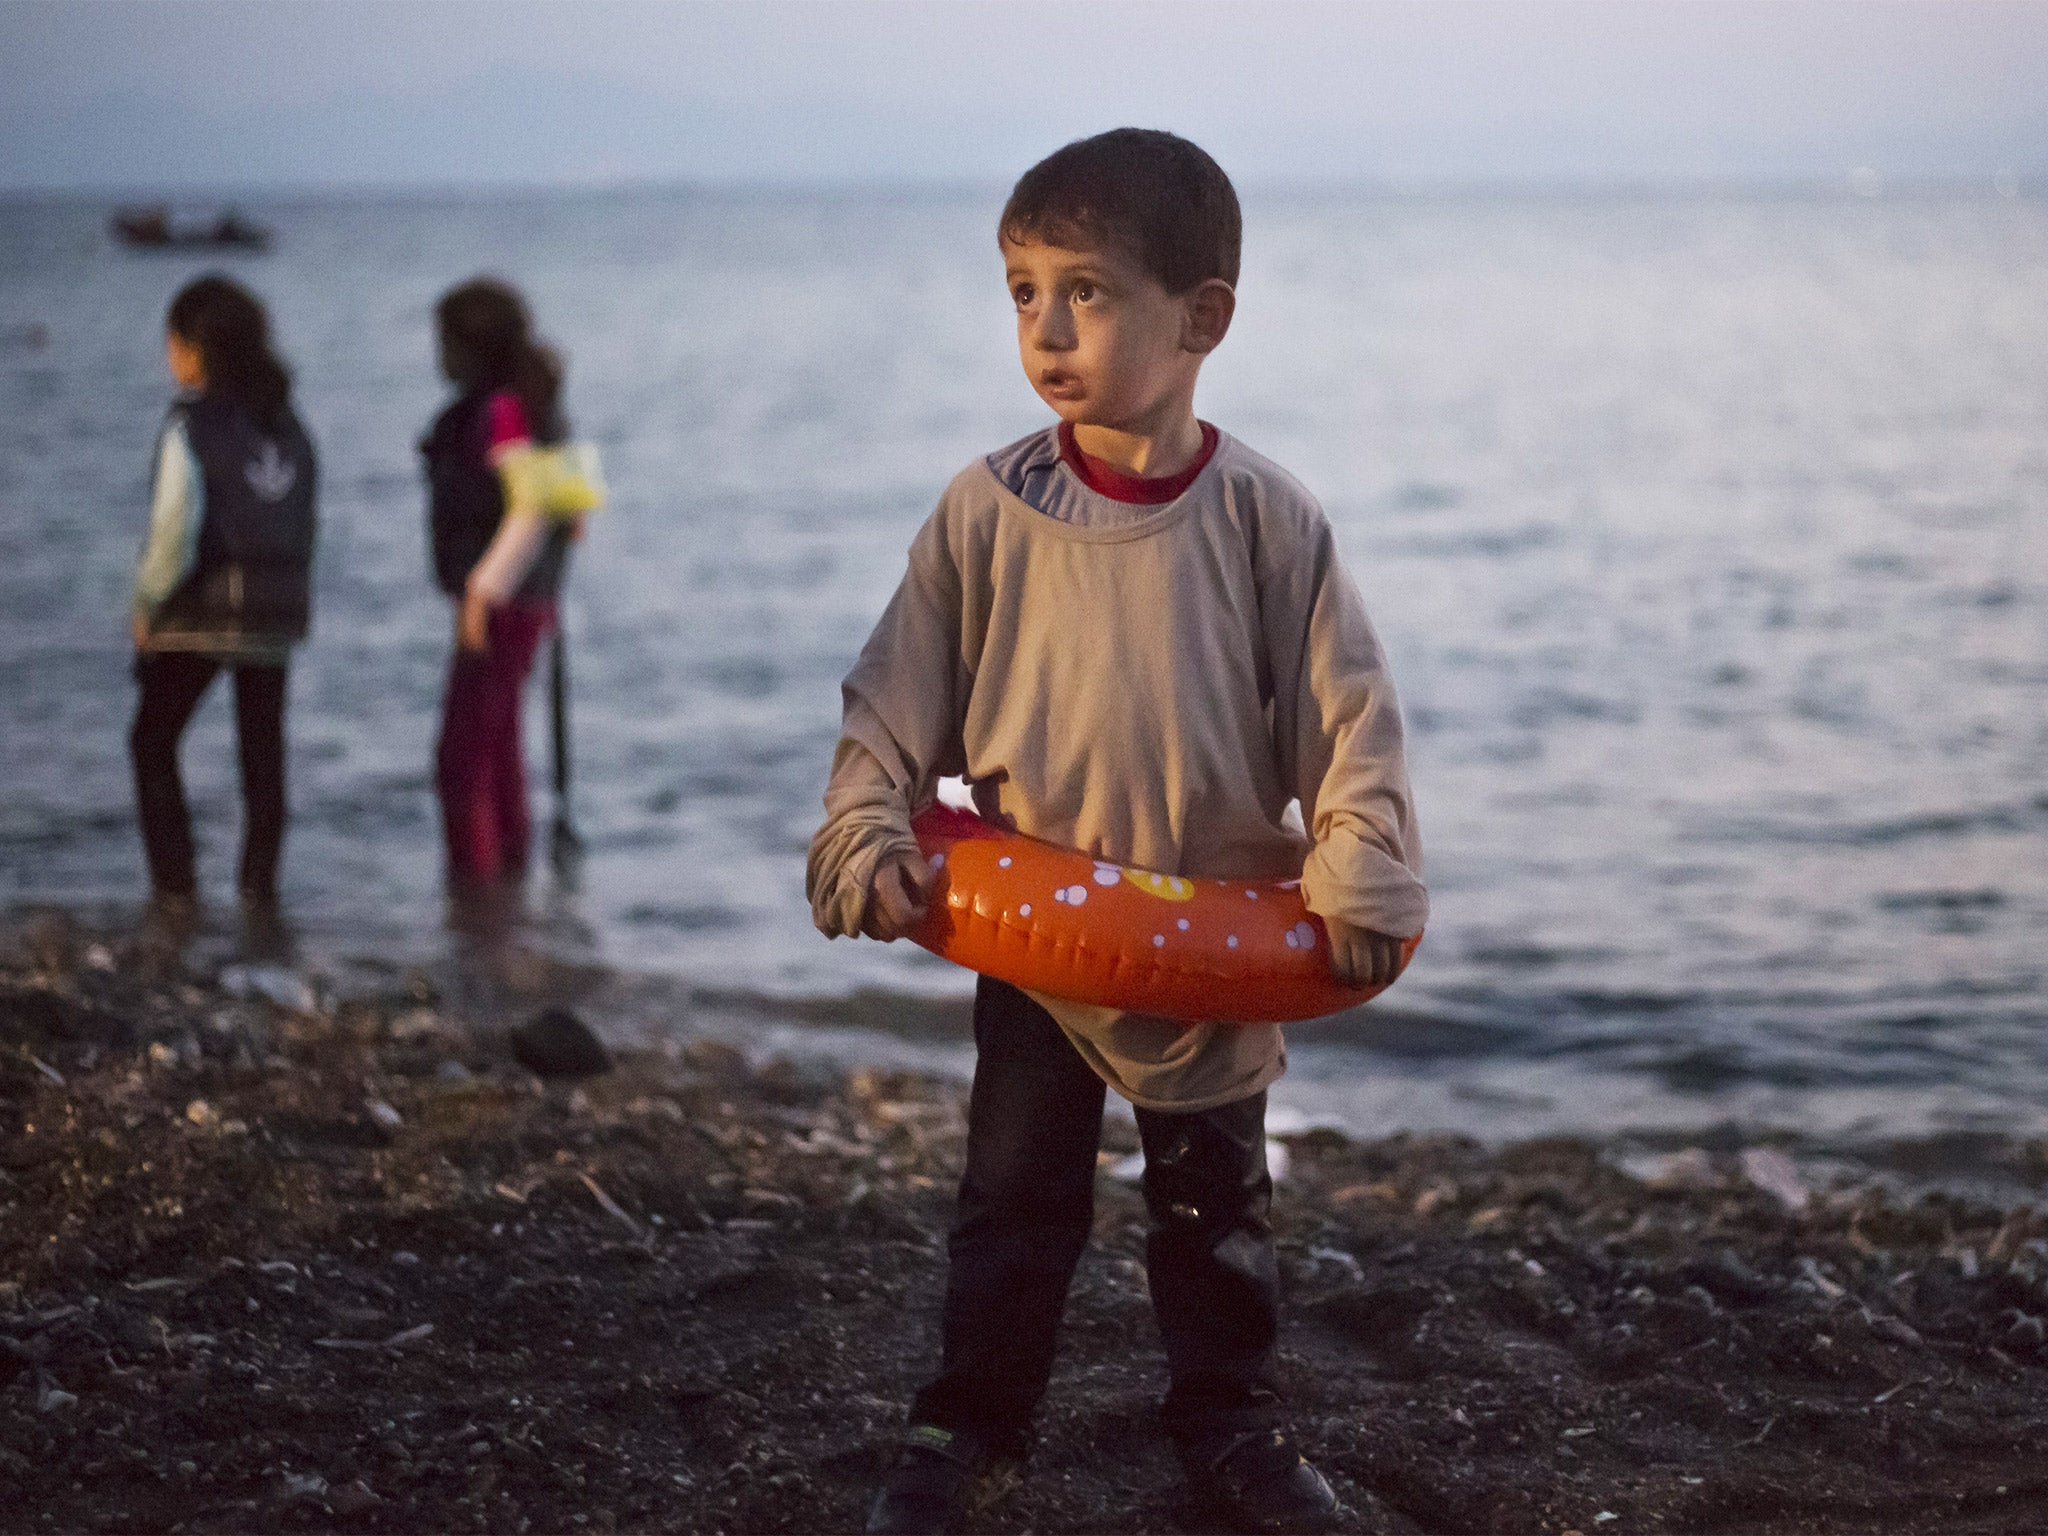 A young Syrian boy arrives on the island of Kos, which is struggling to cope with the record numbers of refugees